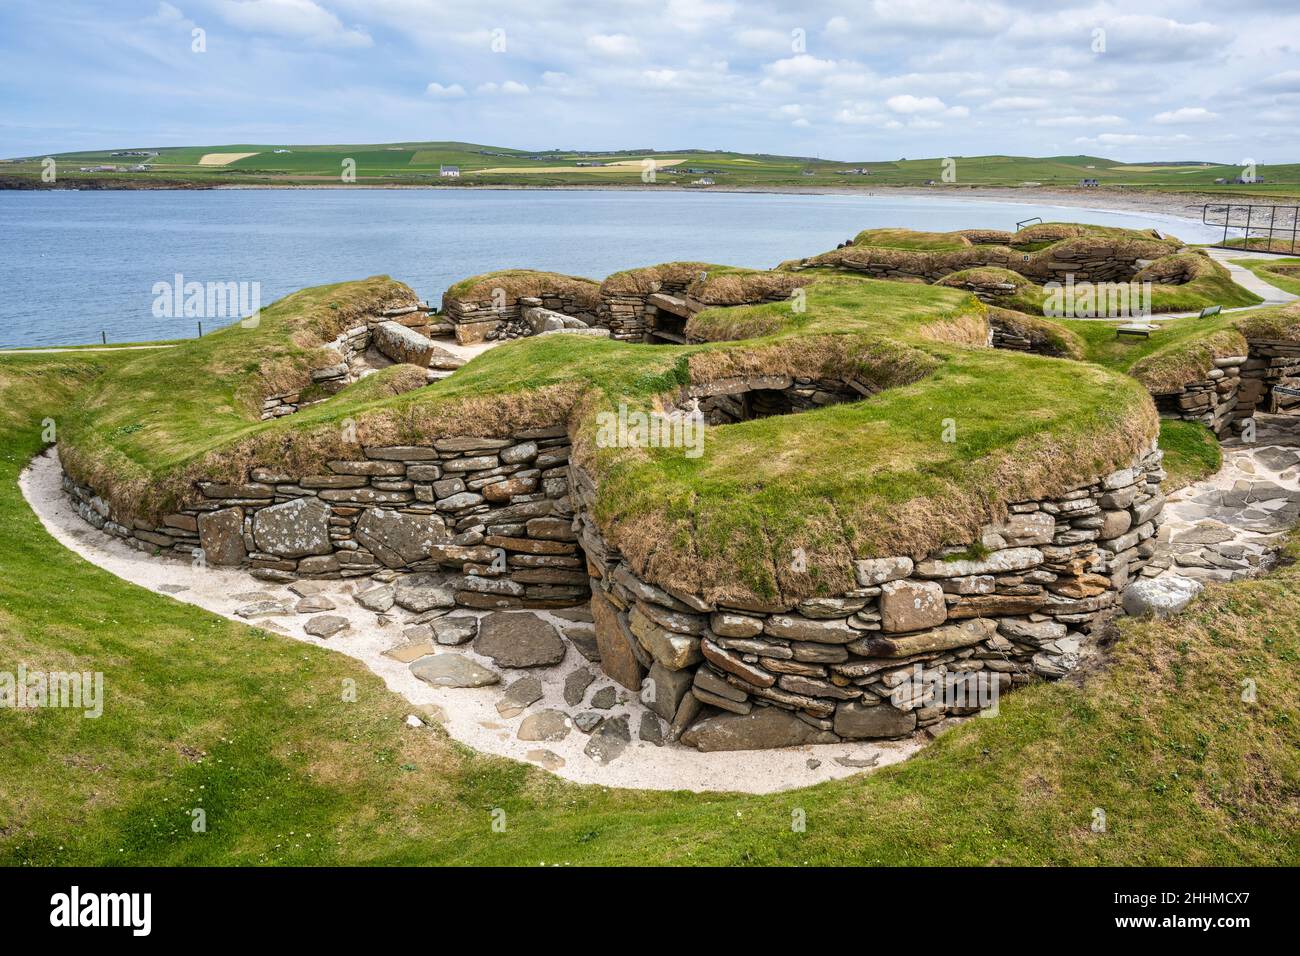 Neolithic settlement of Skara Brae next to Bay of Skaill near Sandwick on Mainland Orkney in Scotland Stock Photo